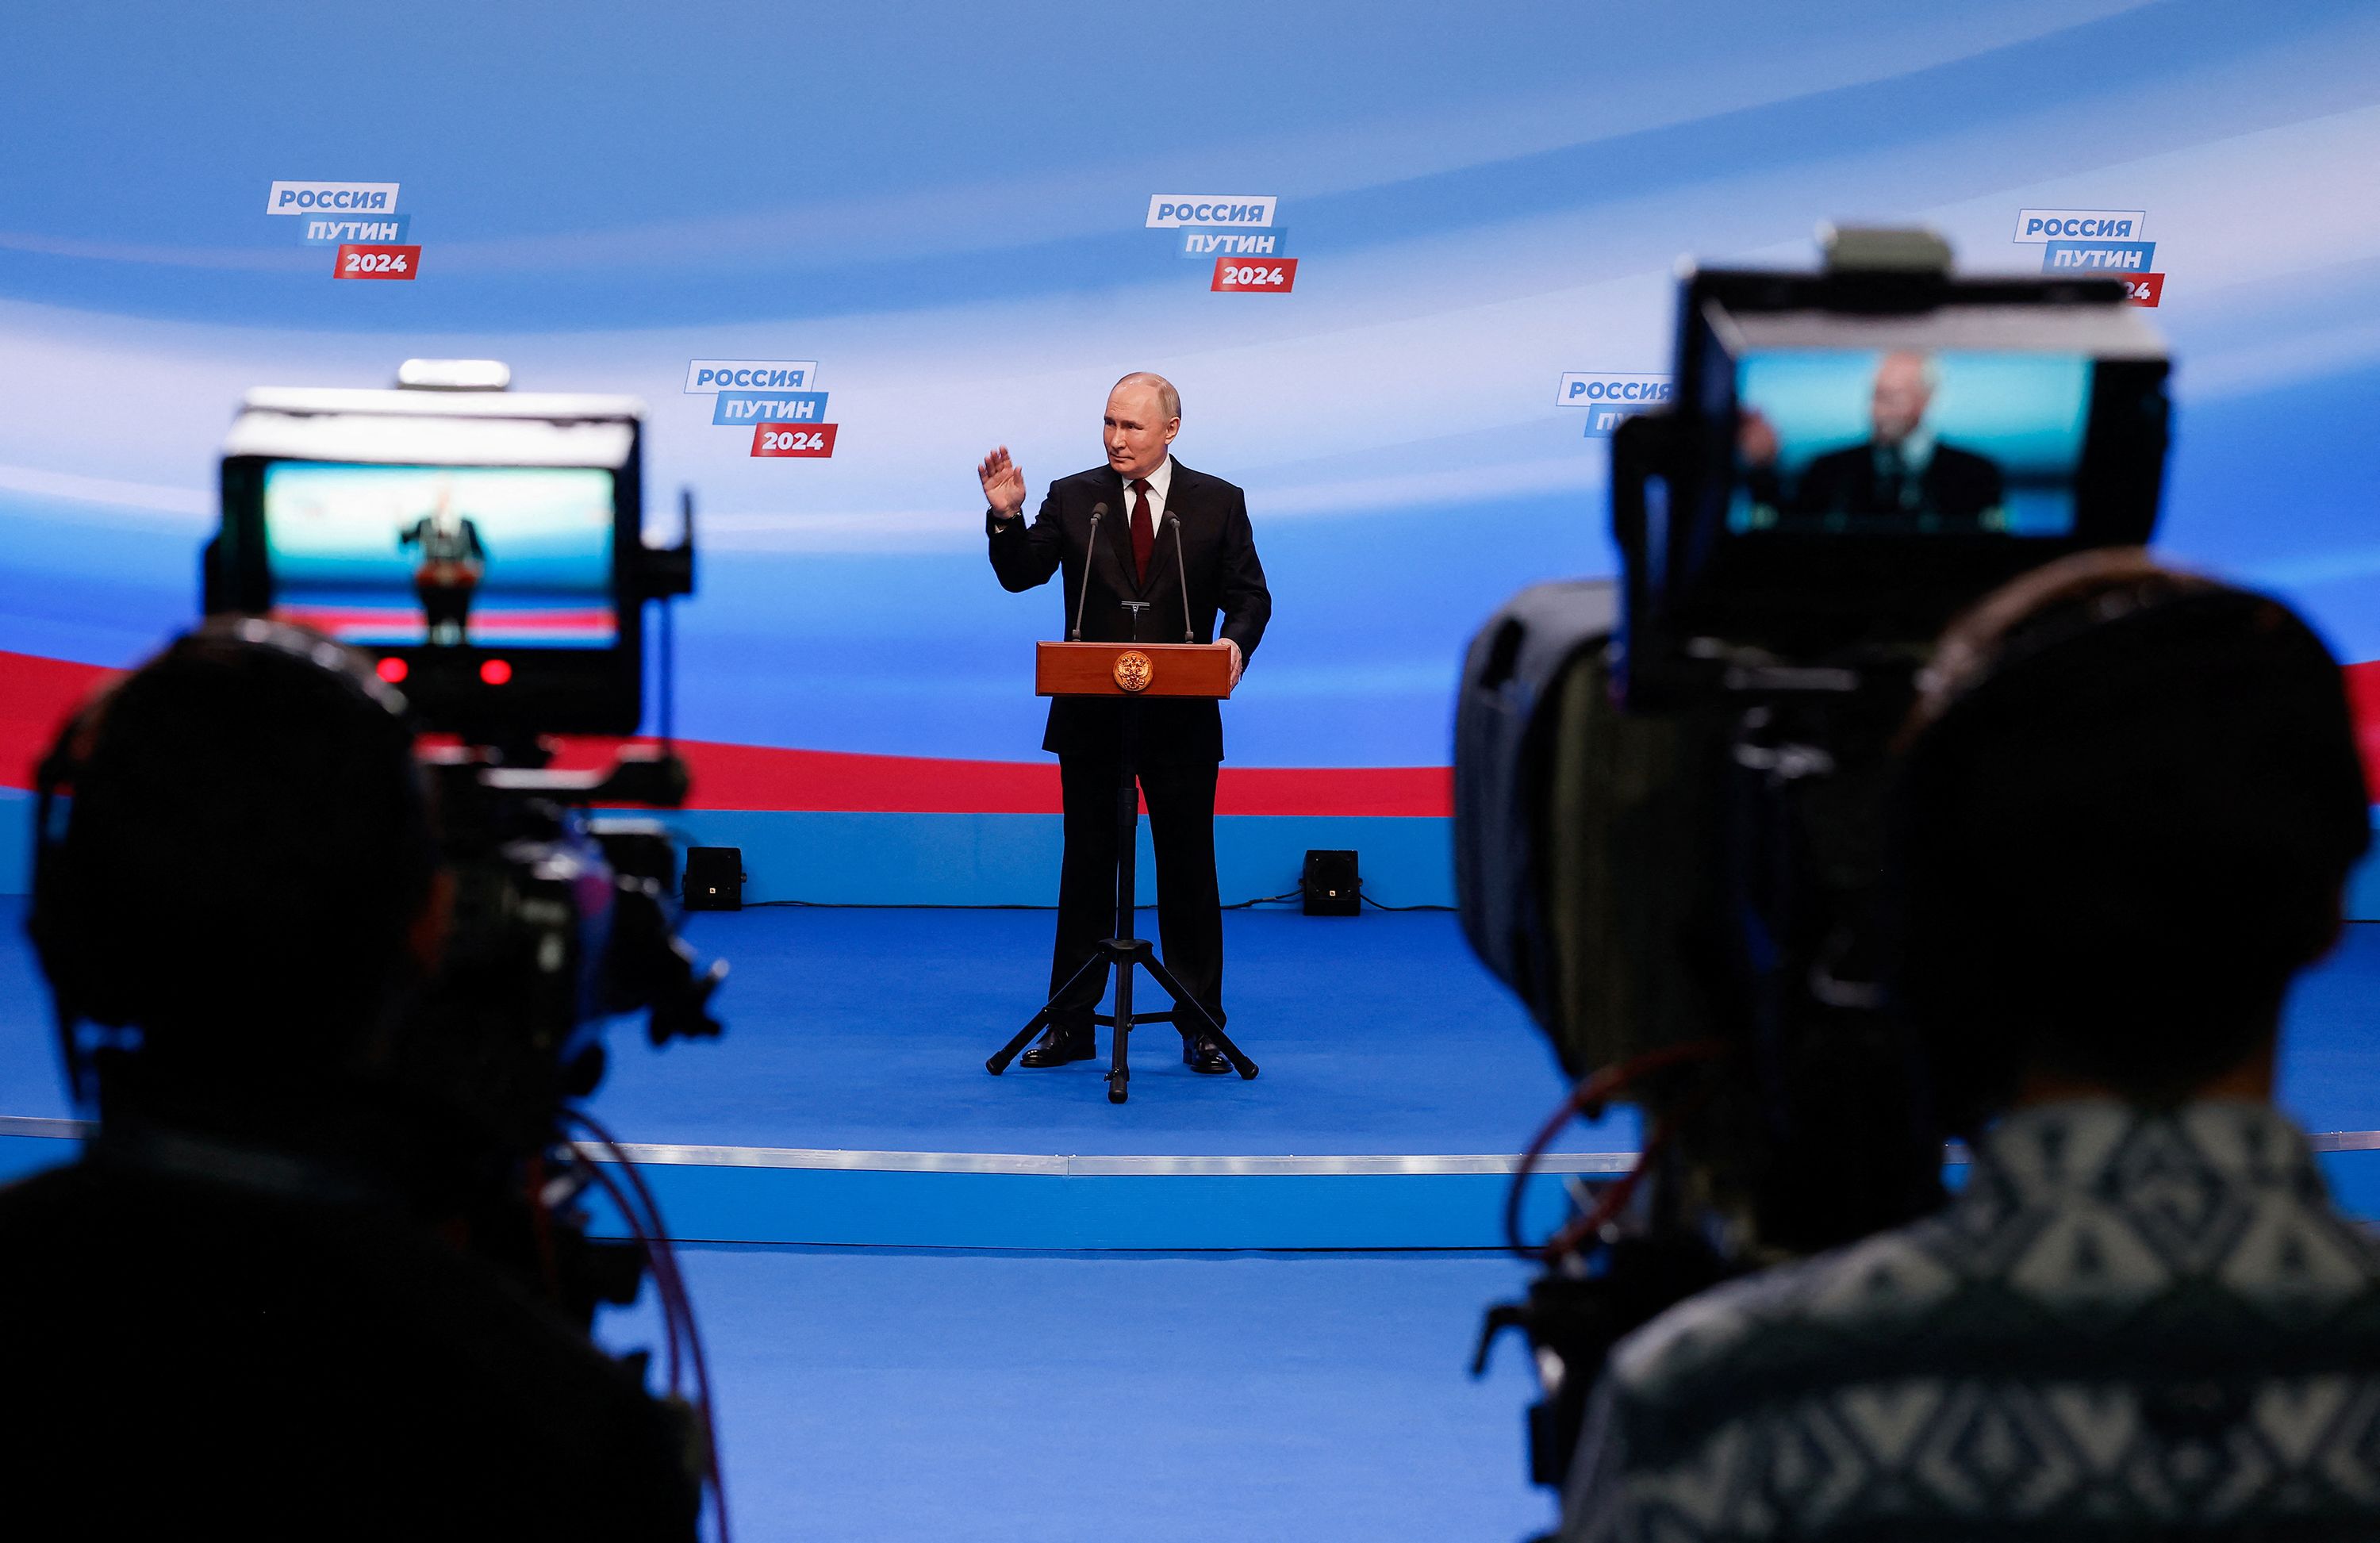 Russian President <a href="https://www.cnn.com/2023/06/24/world/gallery/vladimir-putin/index.html" target="_blank">Vladimir Putin</a> speaks at a press conference in Moscow after partial election results indicated he would <a href="https://www.cnn.com/2024/03/17/europe/putin-wins-russia-presidential-election-intl/index.html" target="_blank">win another term</a> on Sunday, March 18.